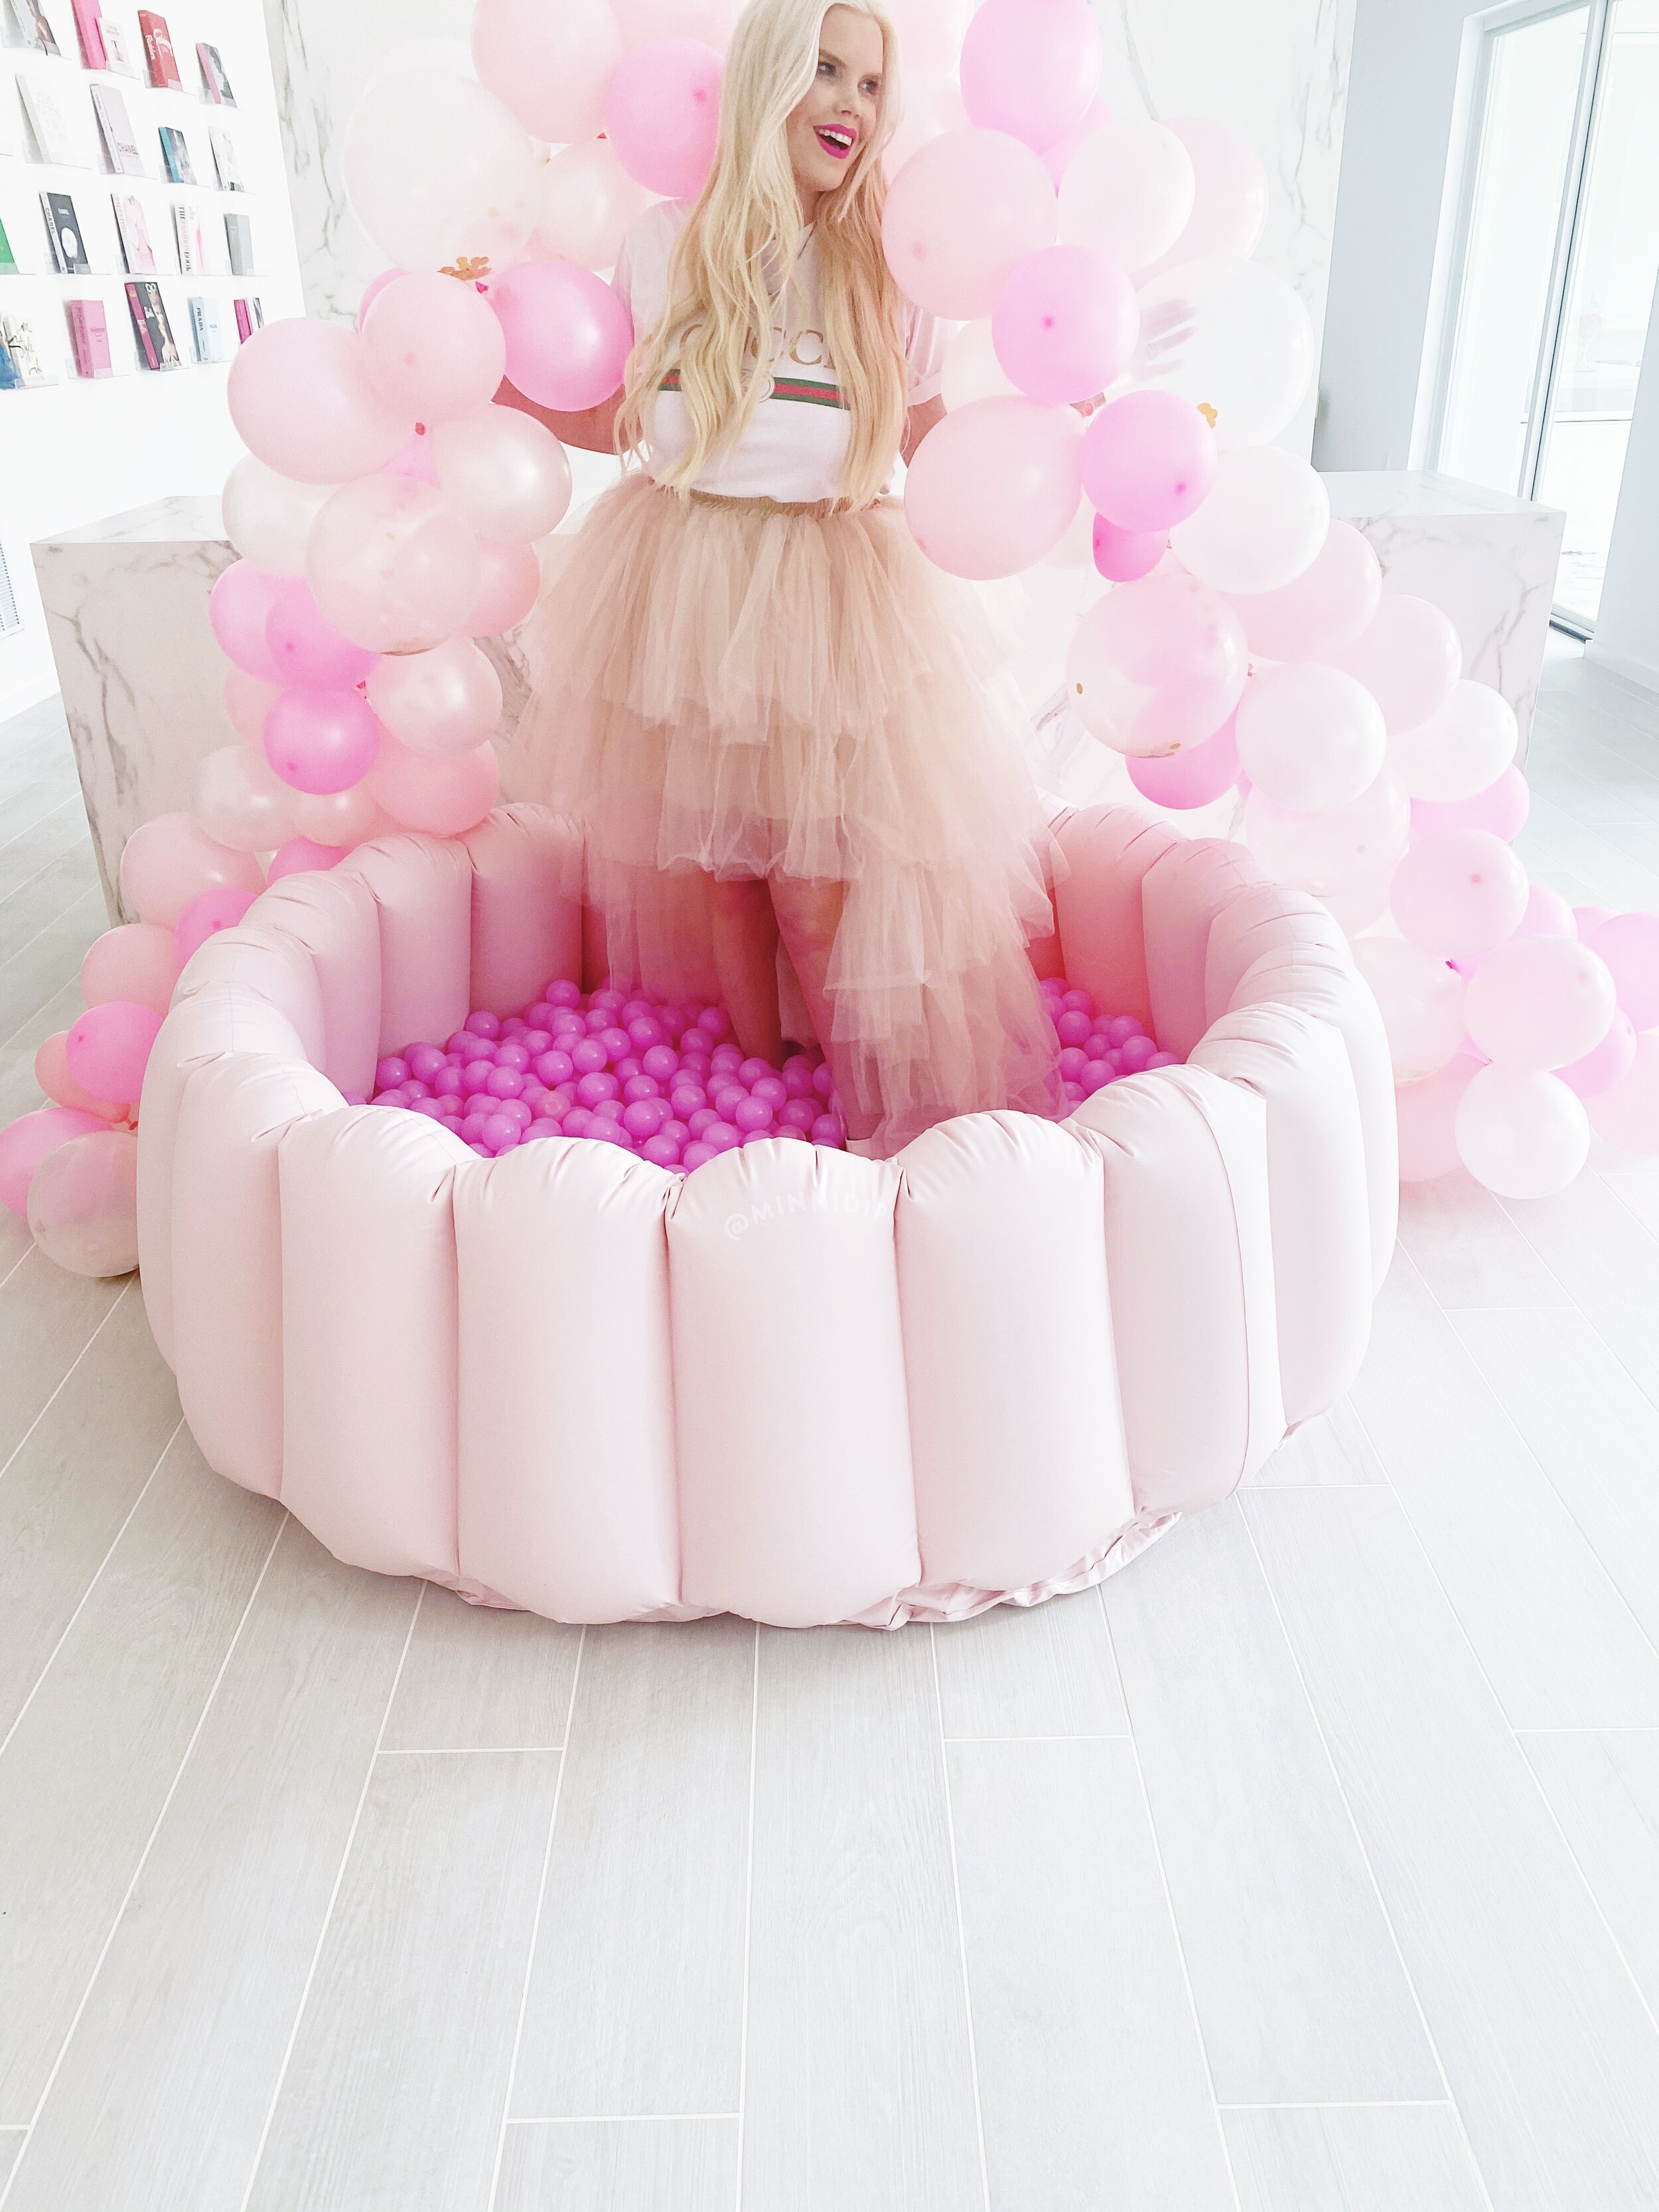 The-Caroline-Doll-Birthday-Pink-Ball-Pit-Minnidip-Inflatable-Pool-Luxury-Office-Goals-Party-Lifestyle-6.JPG